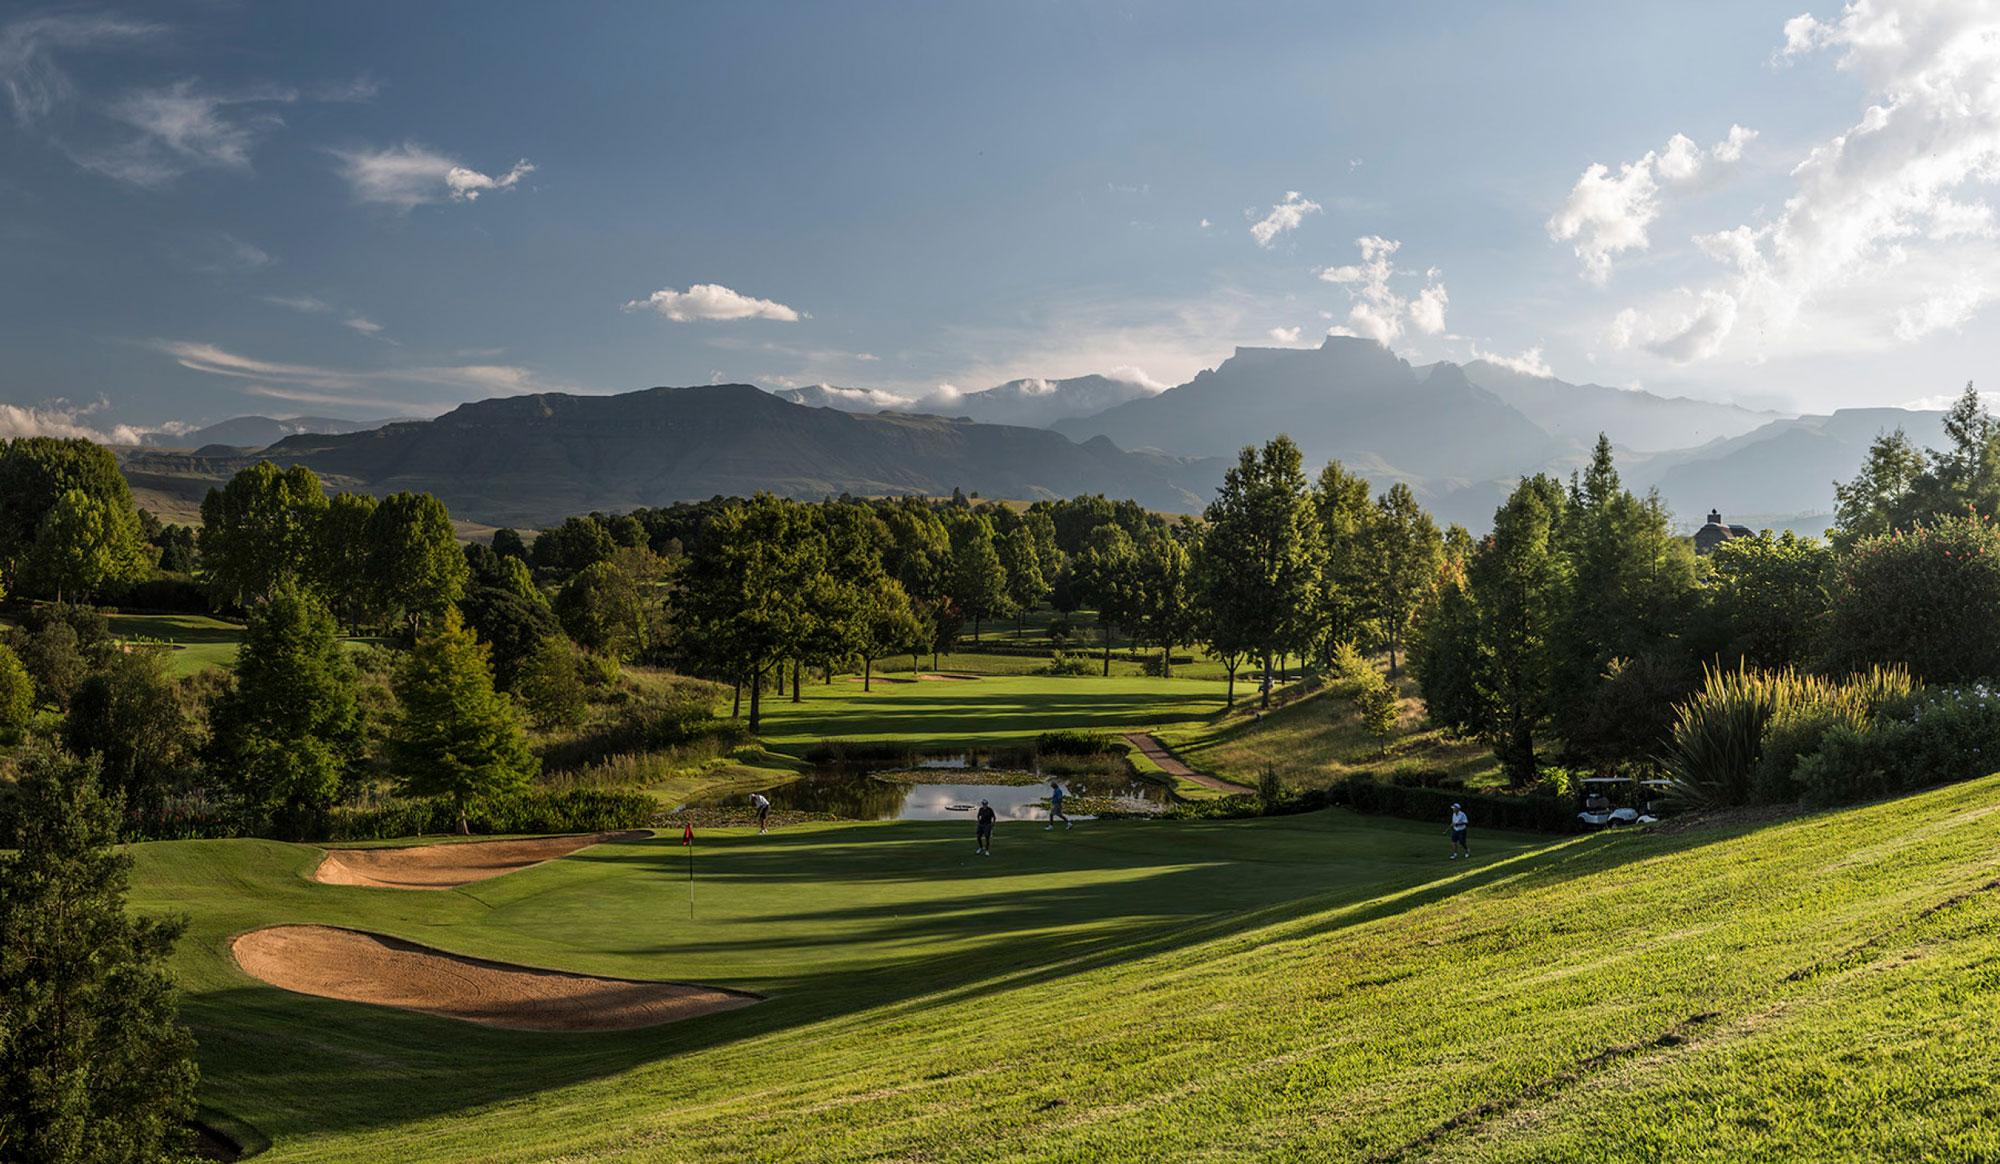 The Champagne Sports Golf Club's beautiful golf course situated in marvelous South Africa.